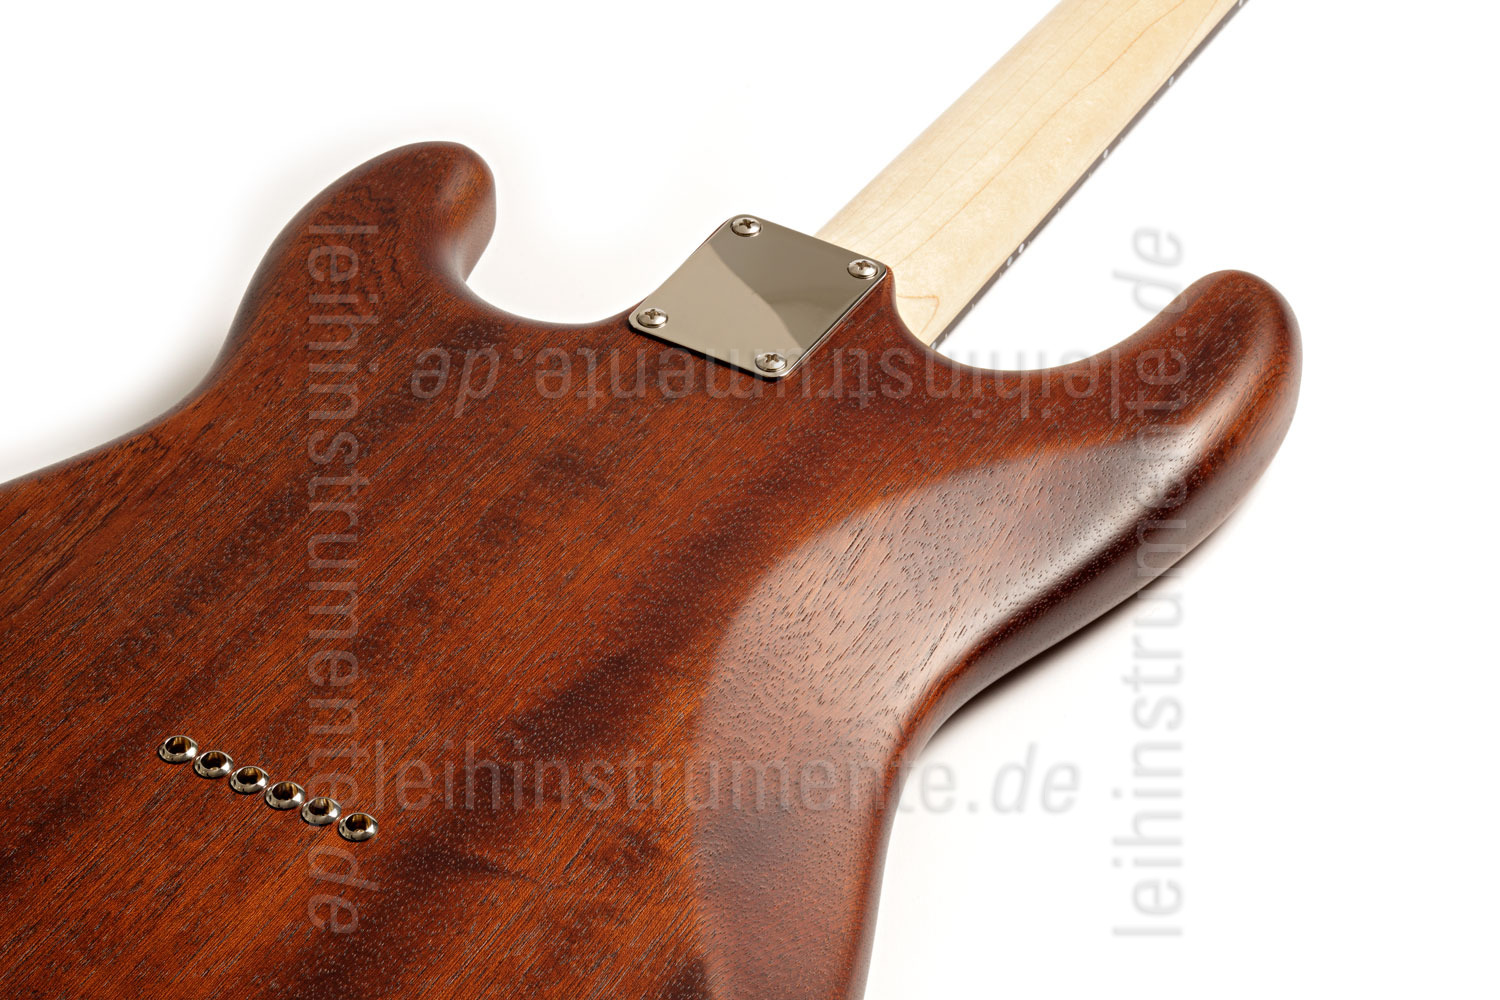 to article description / price Electric Guitar BERSTECHER Deluxe - Old Whisky / Cream Perloid + hard case - made in Germany